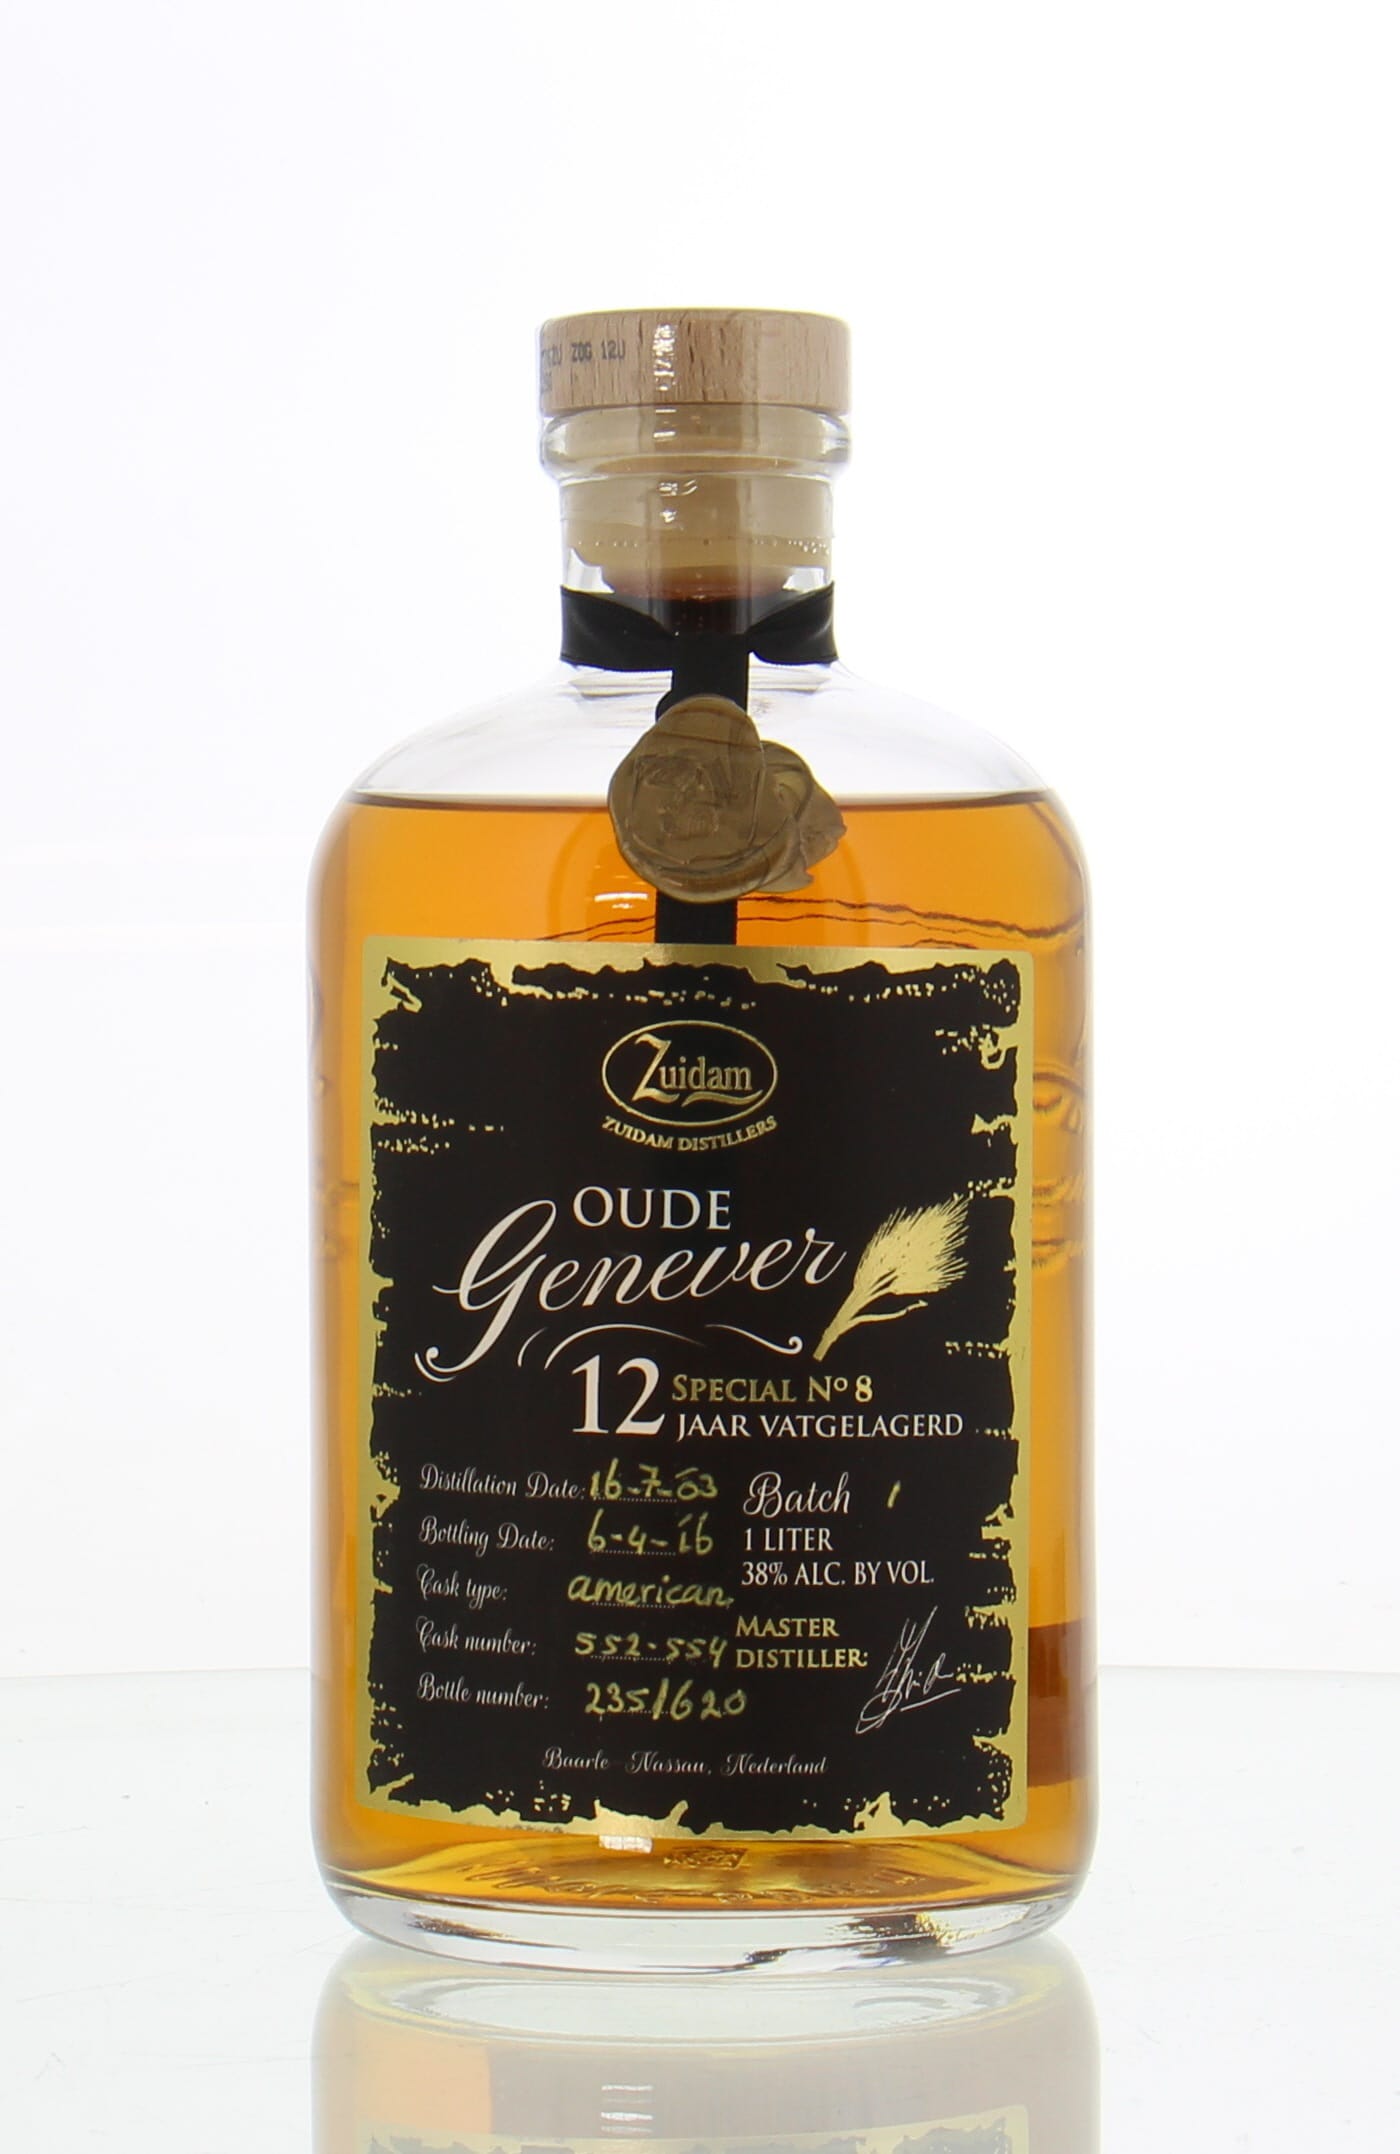 Zuidam - Oude Genever 12 Years Old Special Nº 8 cask 552-554 38% NV Perfect